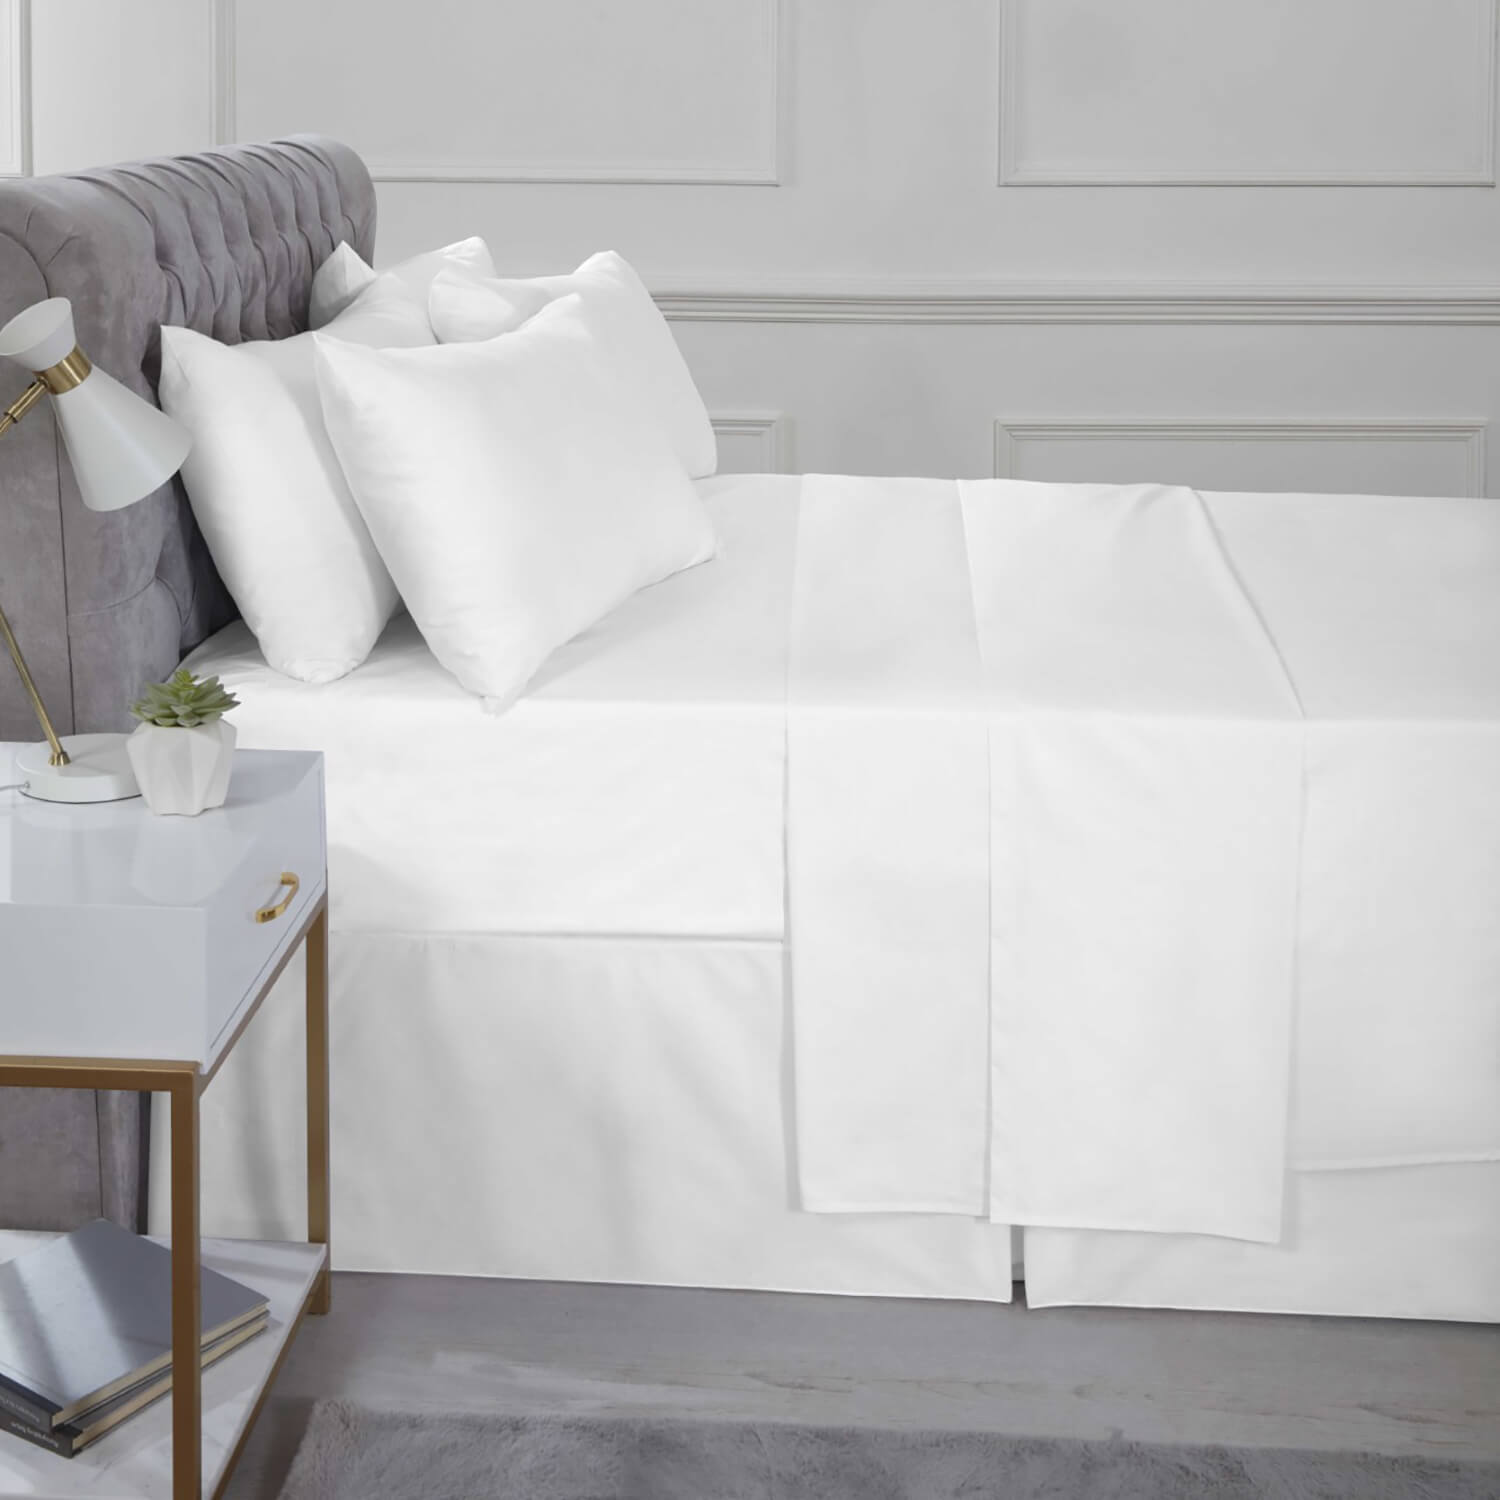 The Home Bedroom Easy Care Percale Flat Sheet - White 1 Shaws Department Stores